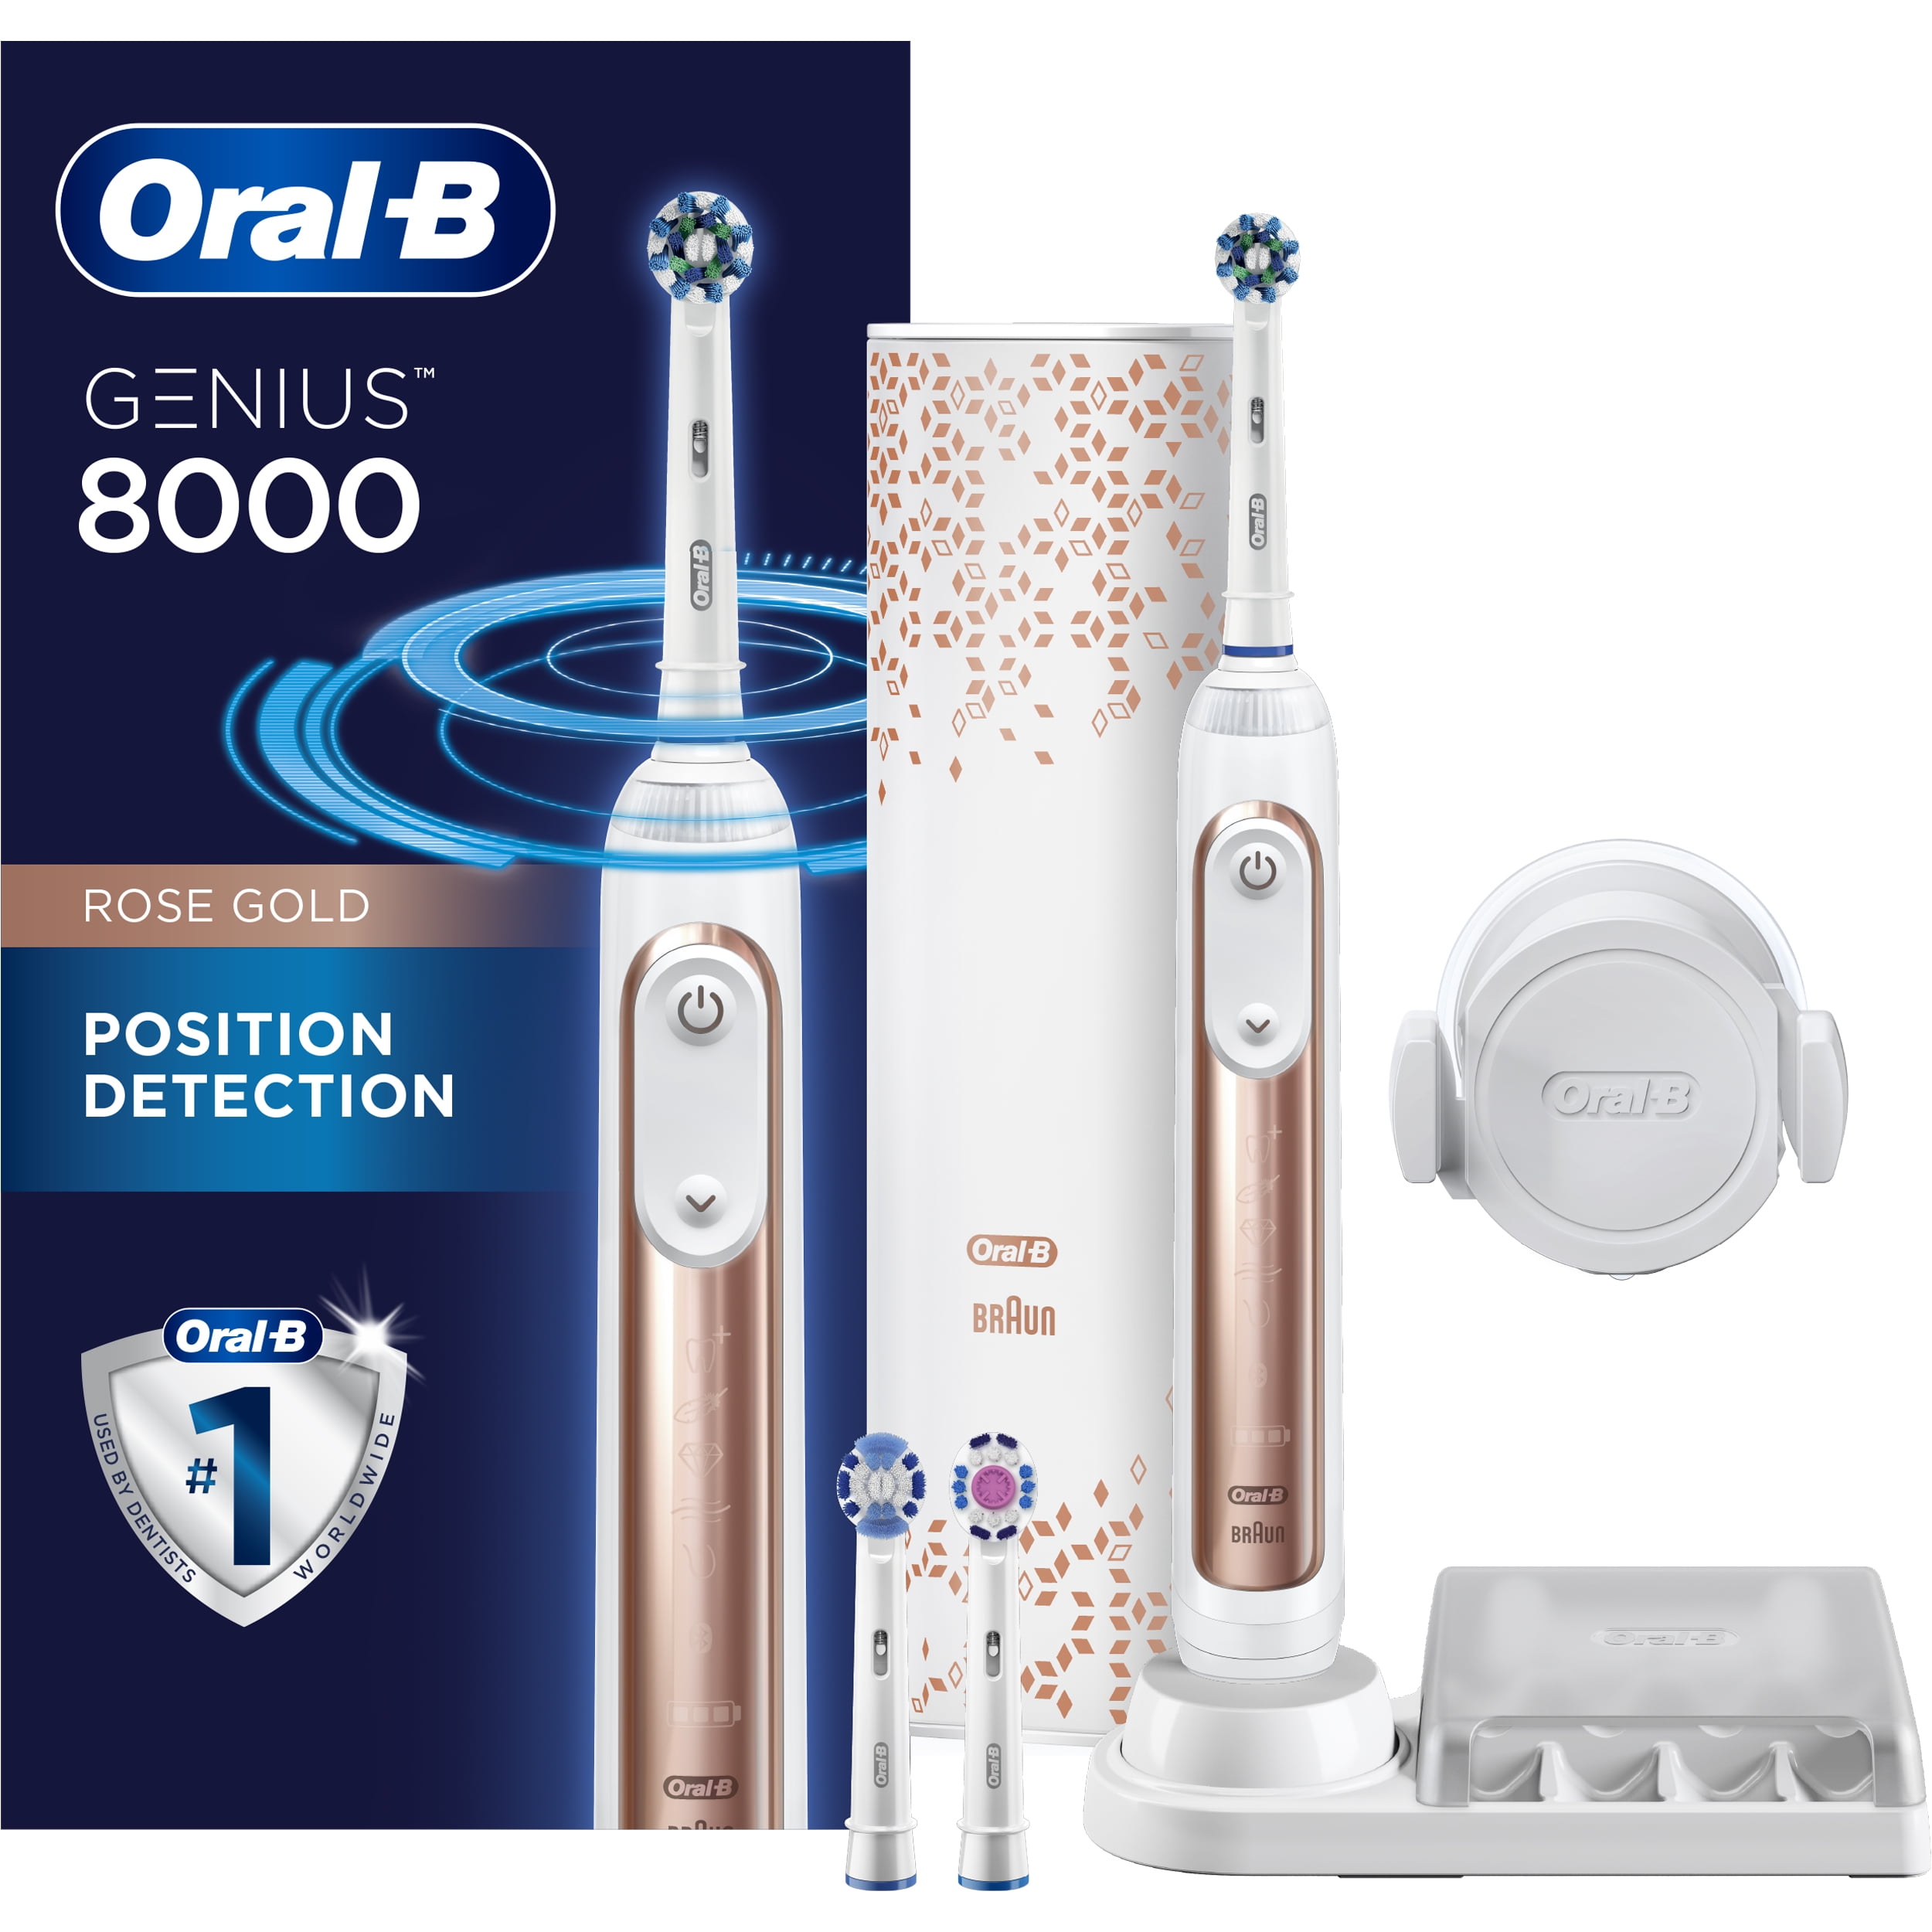 Oral-B Genius 6000 Rechargeable Electric Toothbrush, Black, 1 Ct 